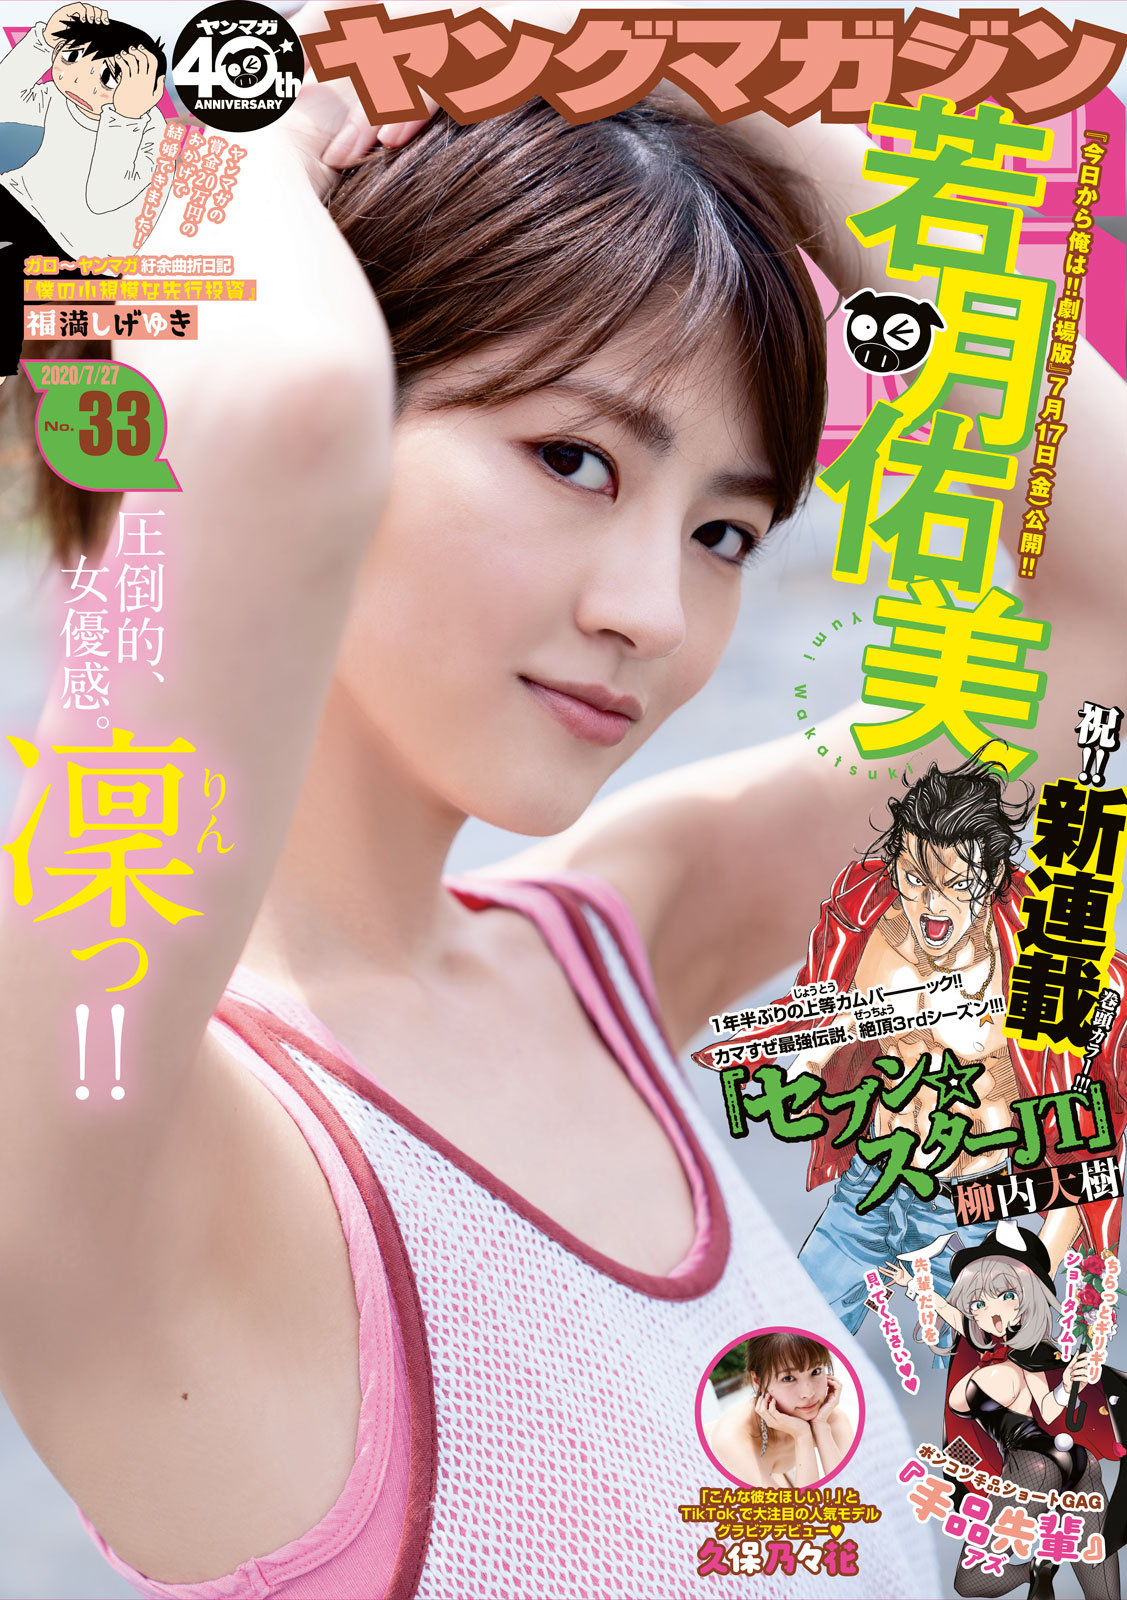 Young Magazine News Cover And Toc For Weekly Young Magazine Issue No 33 This Week S Featured Works Are Daiju Yanauchi S Seven Star Jt And Azu S Tejina Senpai Also Yuichiro Koga S Mina Goroshi No Arthur Ended On This